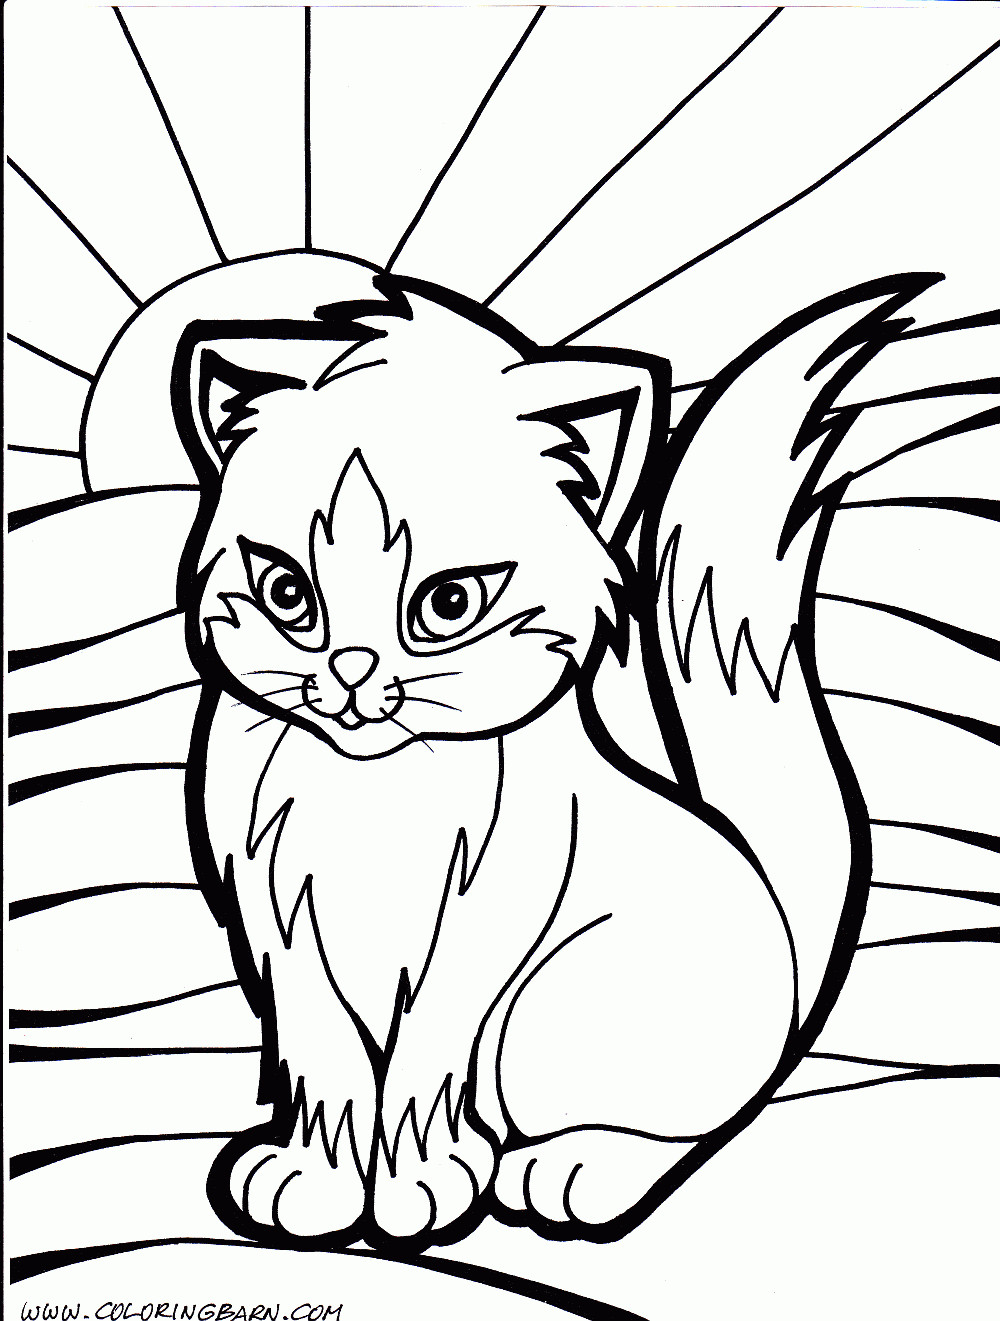 Cat Coloring Pages To Print
 A Simple Free Printable Cat Coloring Sheet